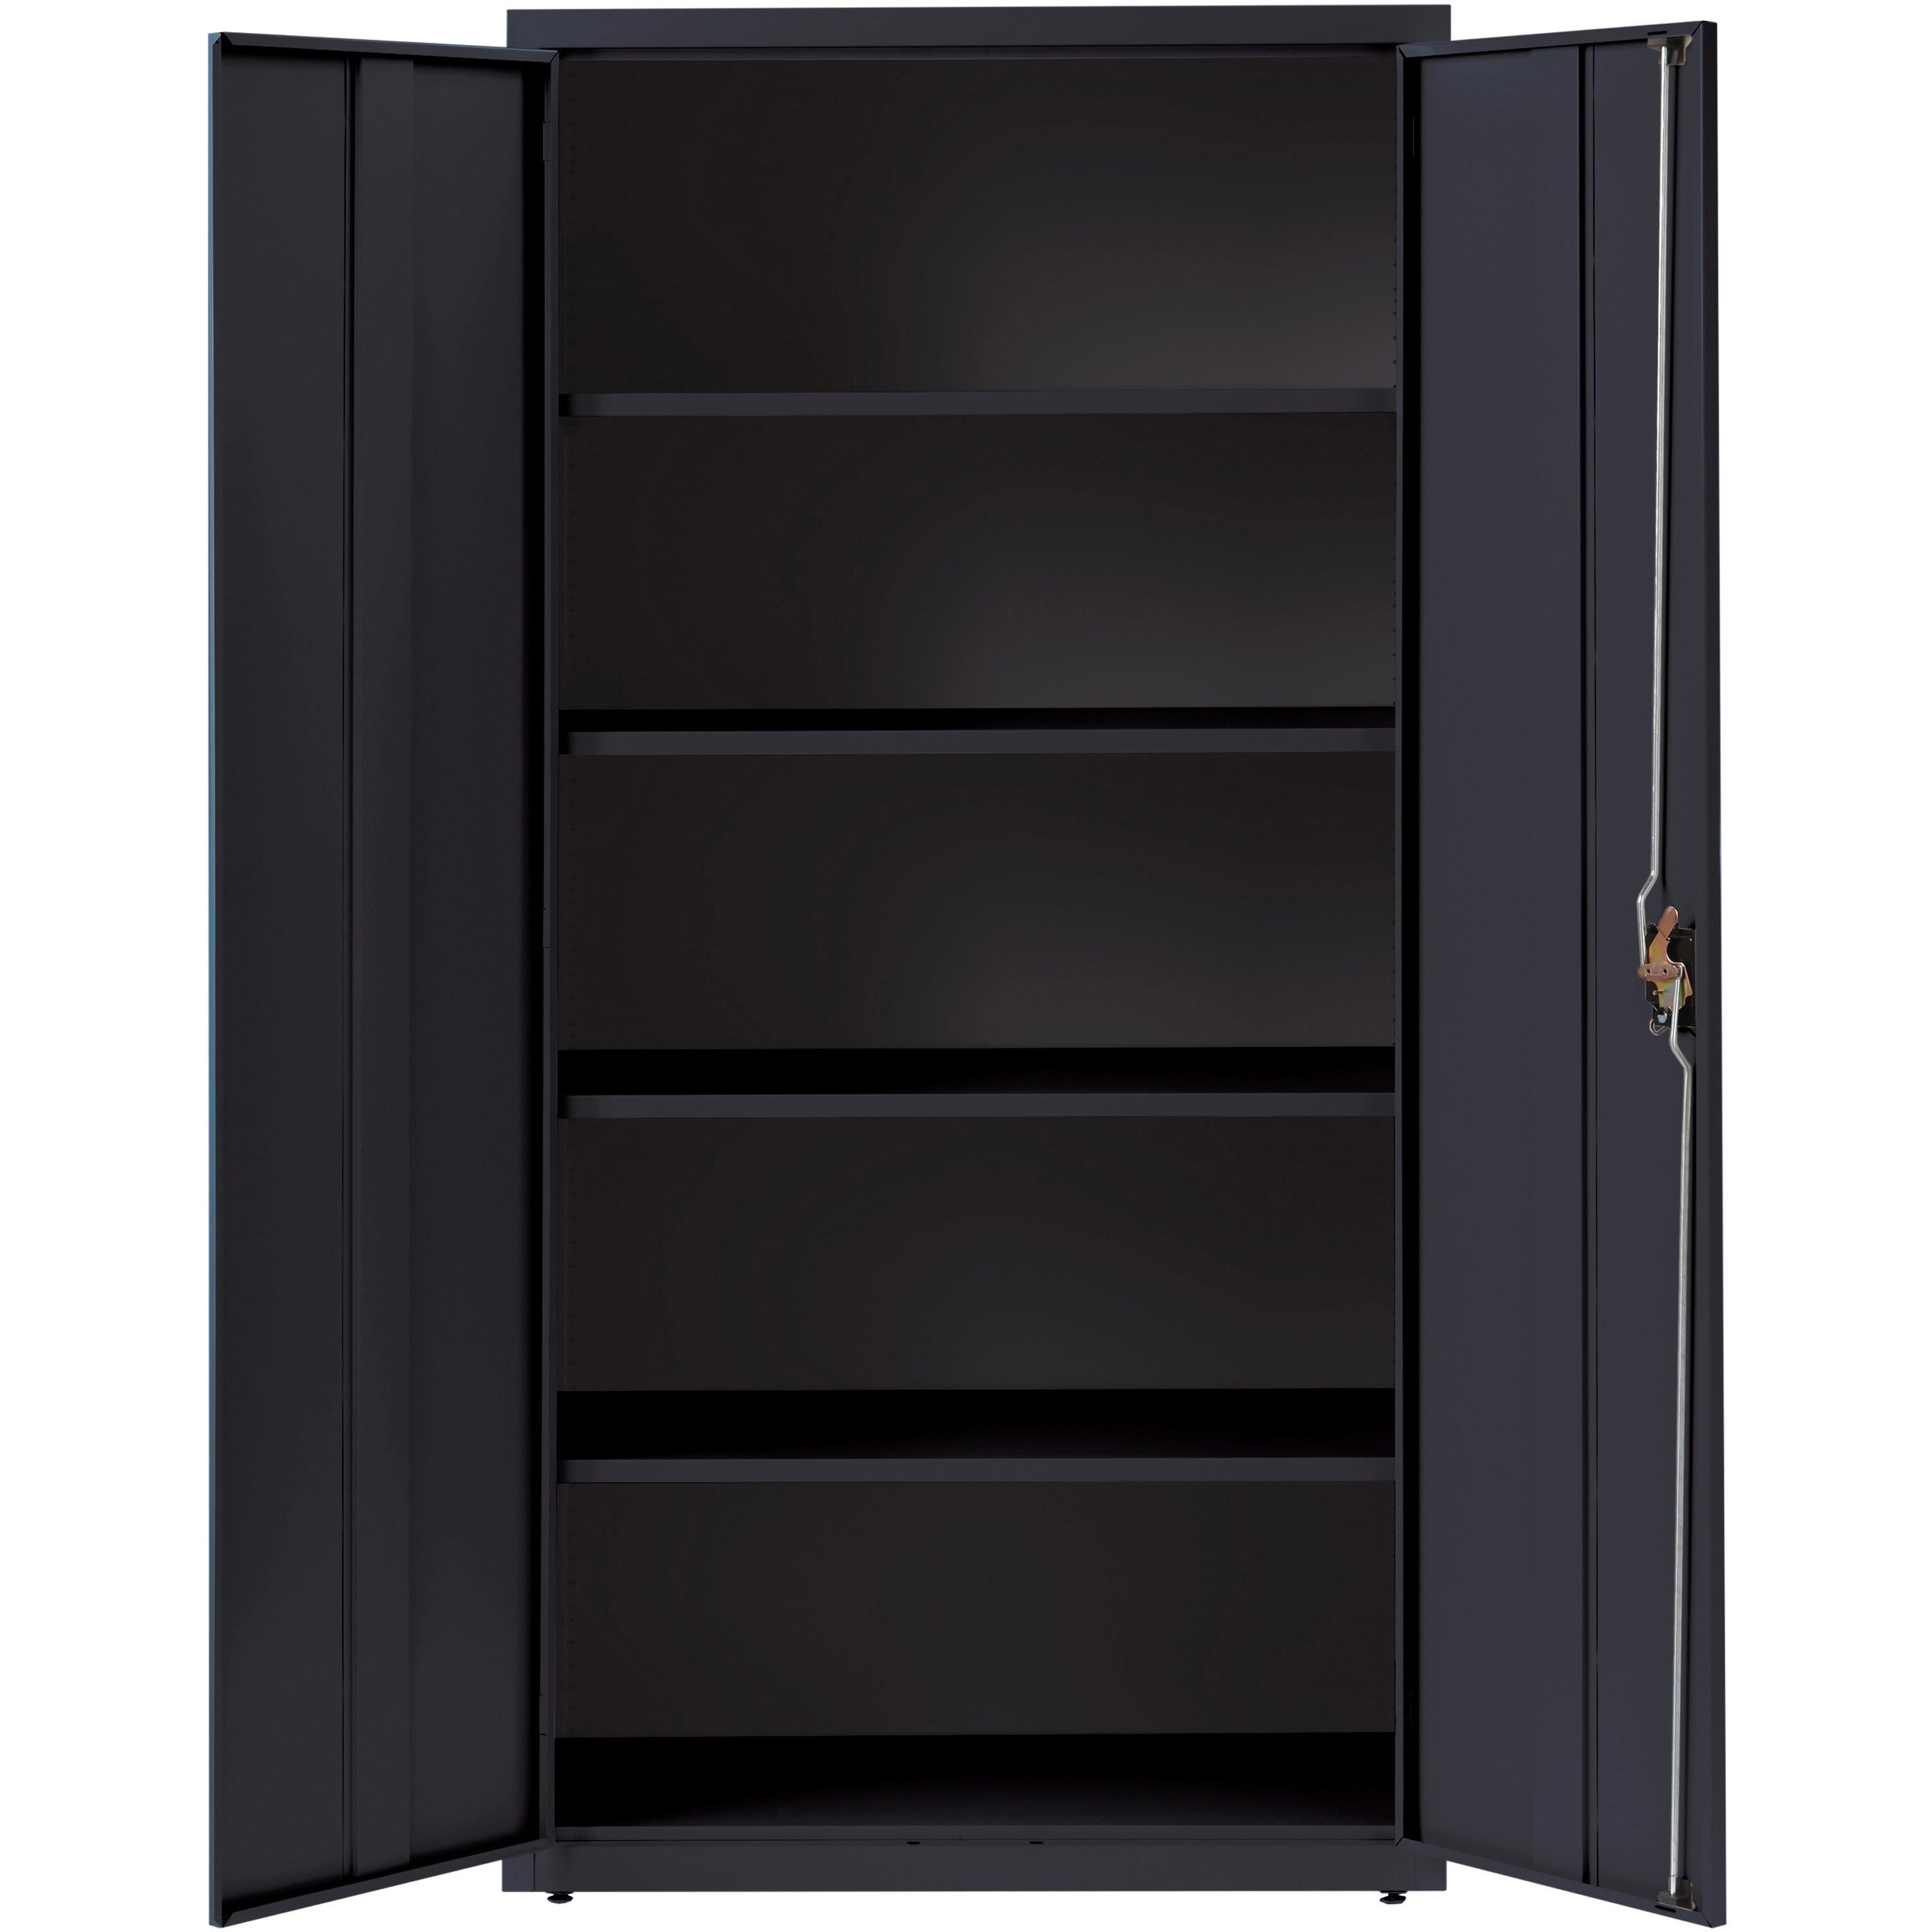 Lorell Fortress Series Storage Cabinet - 36" x 18" x 72" - 5 x Shelf(ves) - Recessed Locking Handle, Hinged Door, Durable - Black - Powder Coated - Steel - Recycled - 